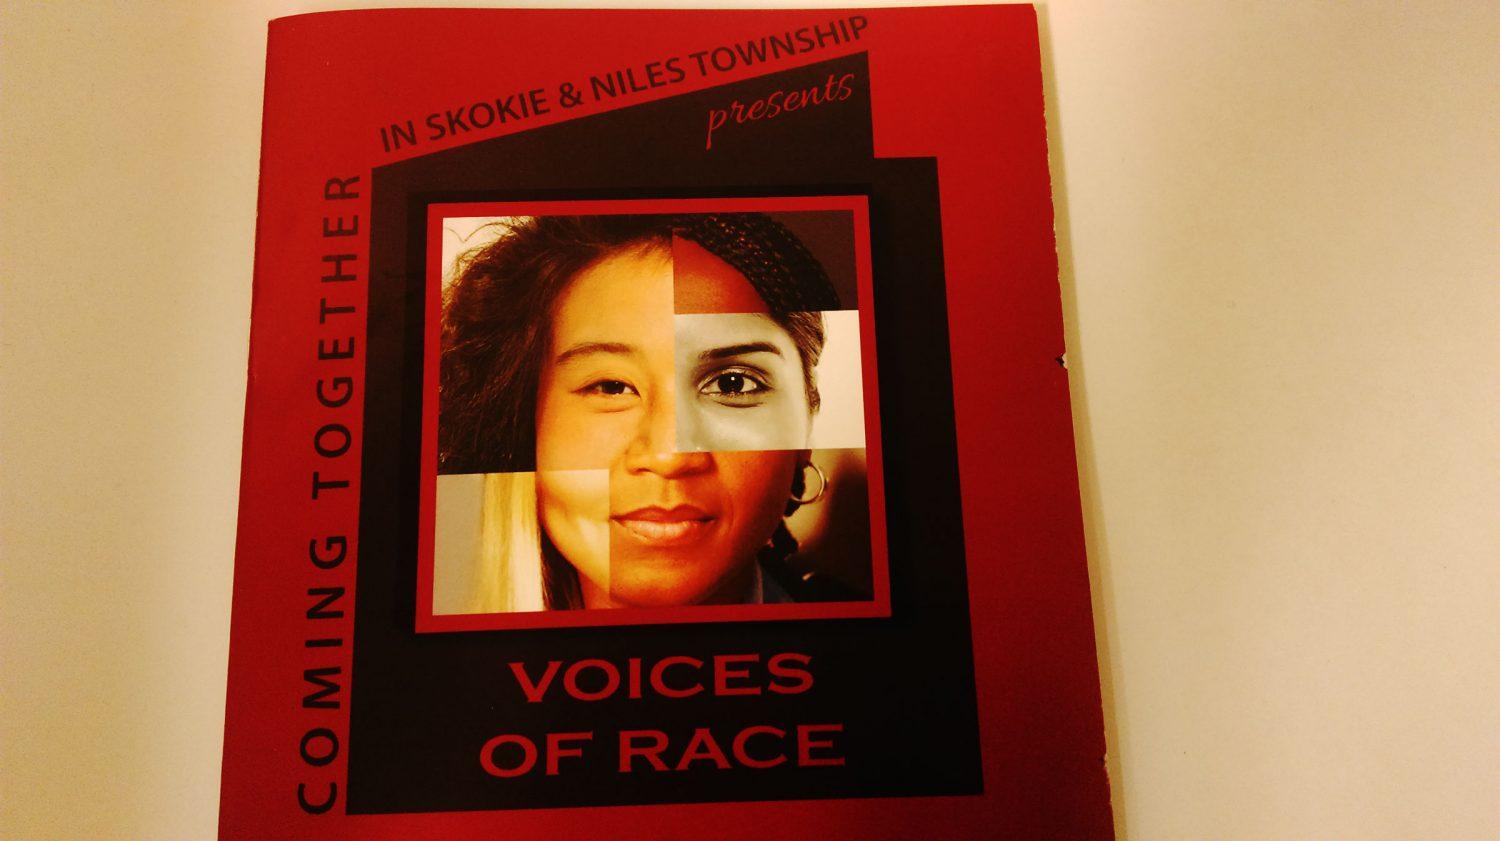 Illinois Holocaust Museum to host Voices of Race